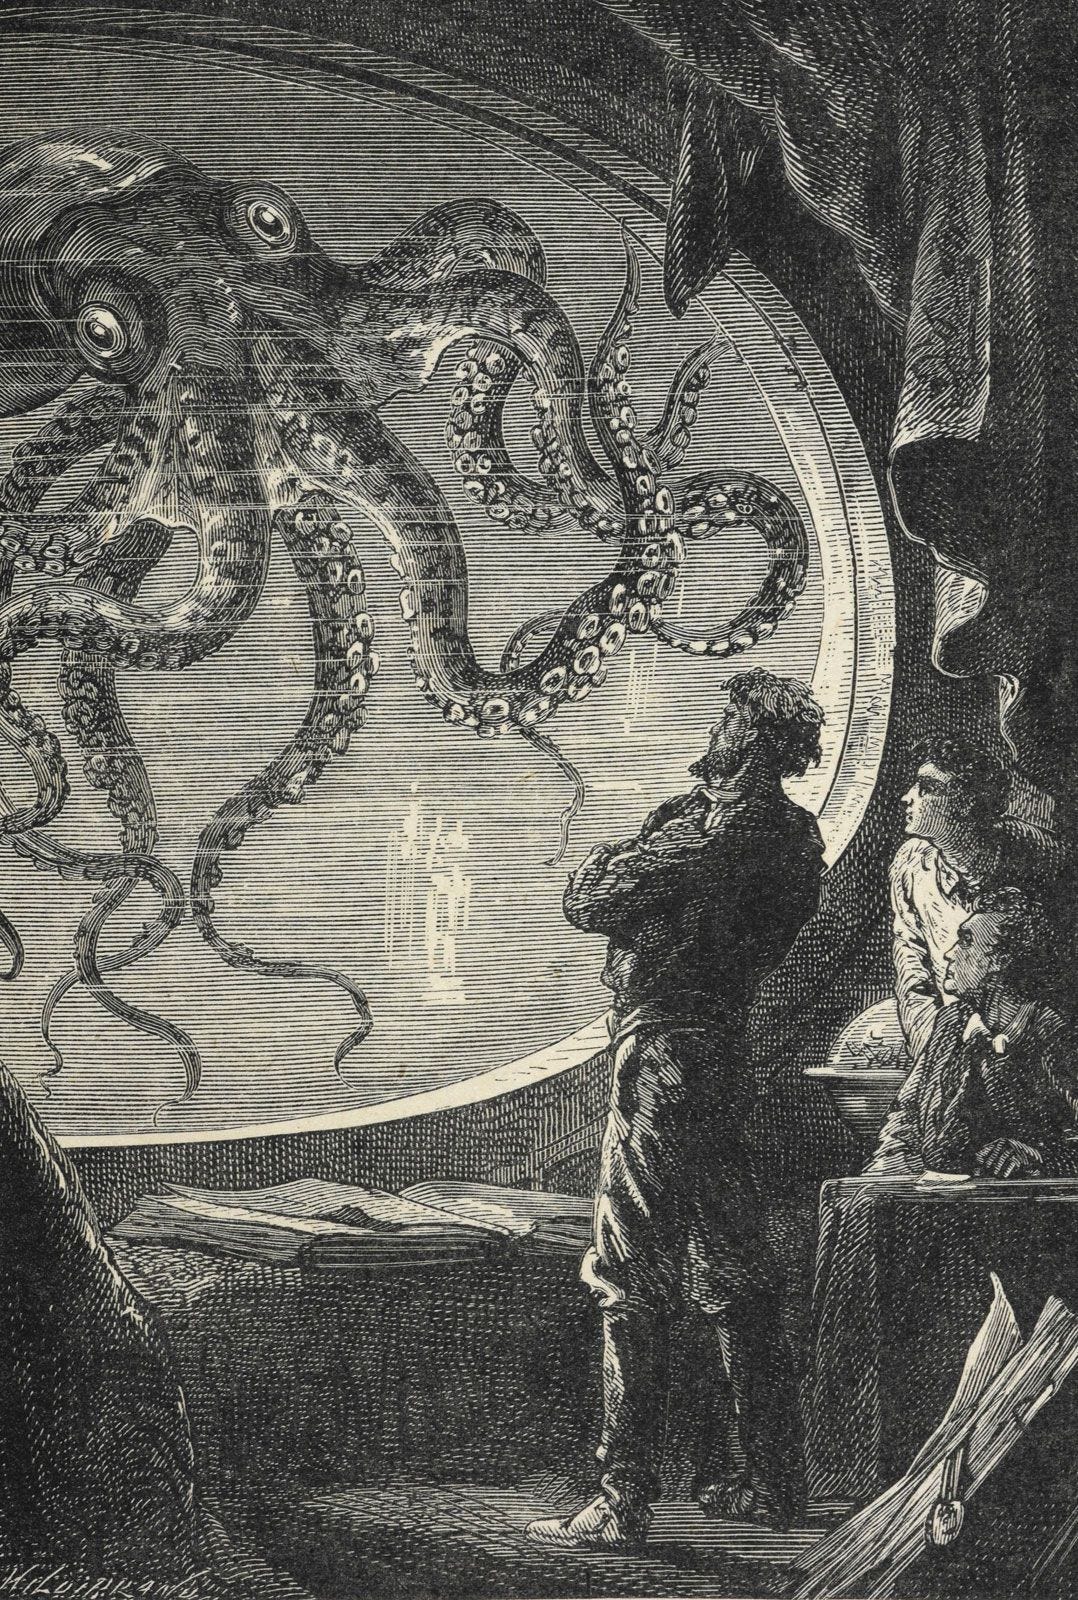 Science fiction - The 19th and early 20th centuries | Britannica